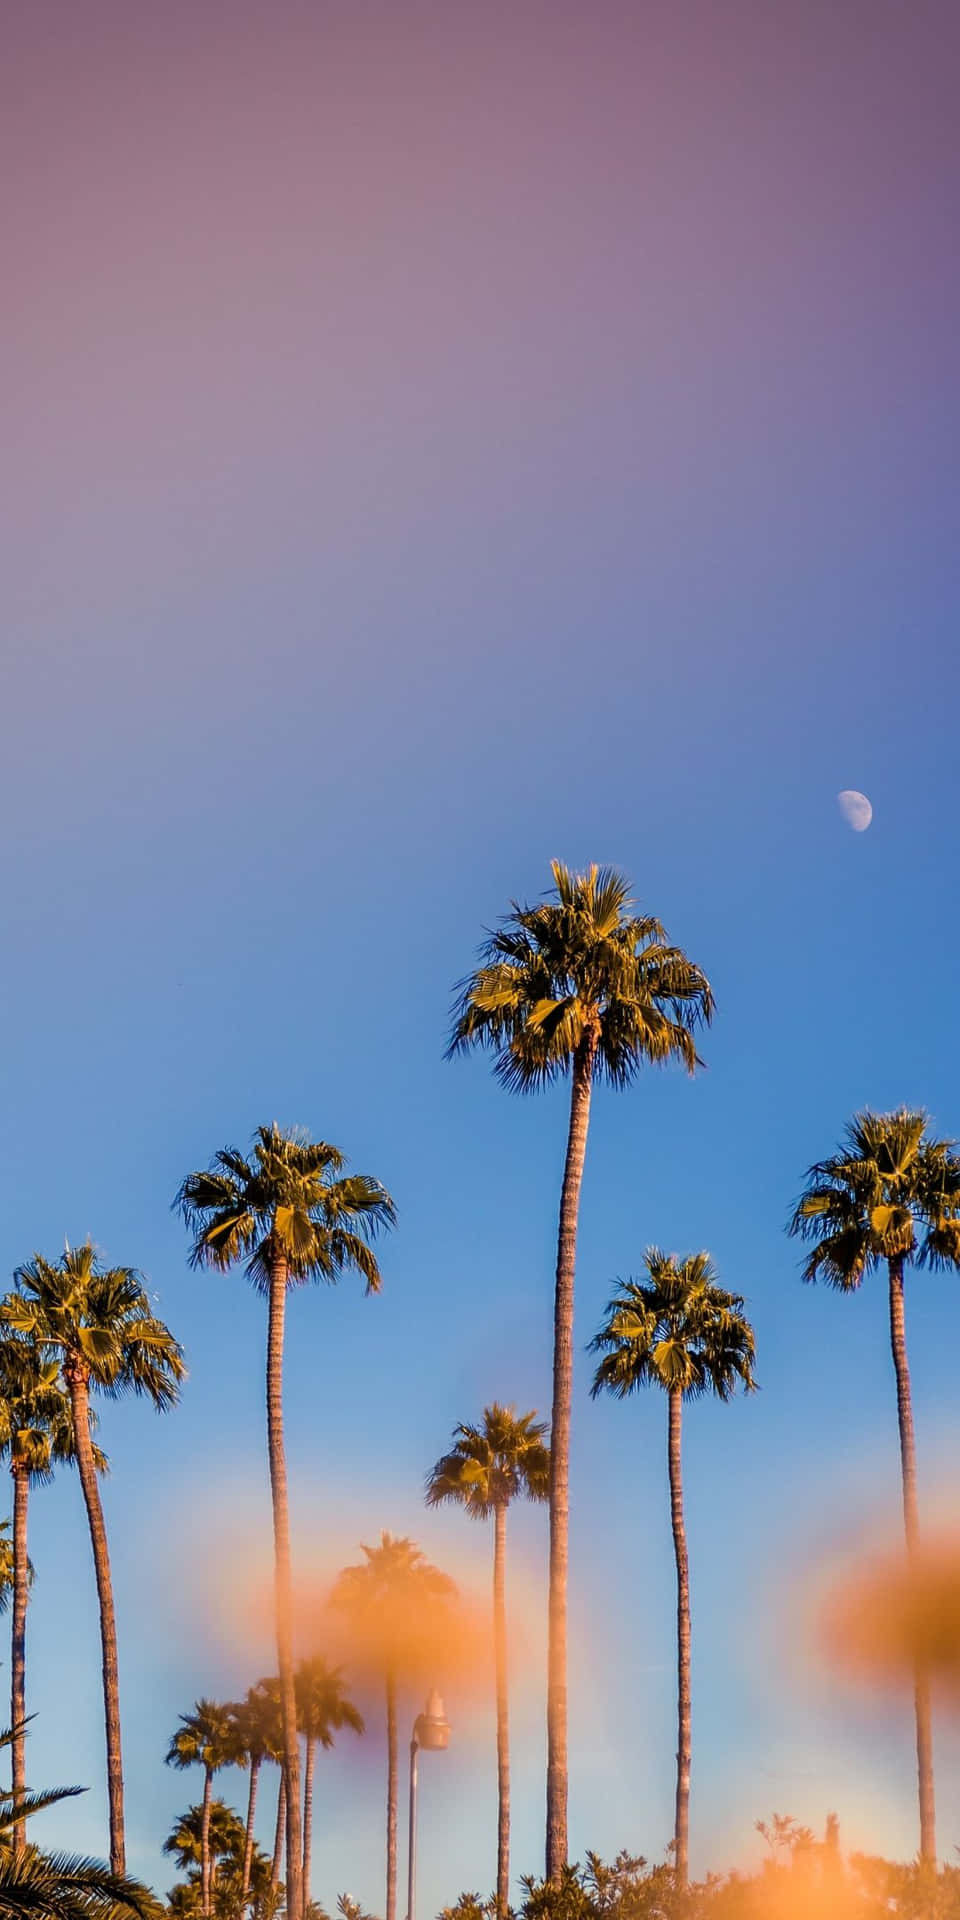 Enjoy the beauty of the nature with a Palm Tree Iphone Wallpaper